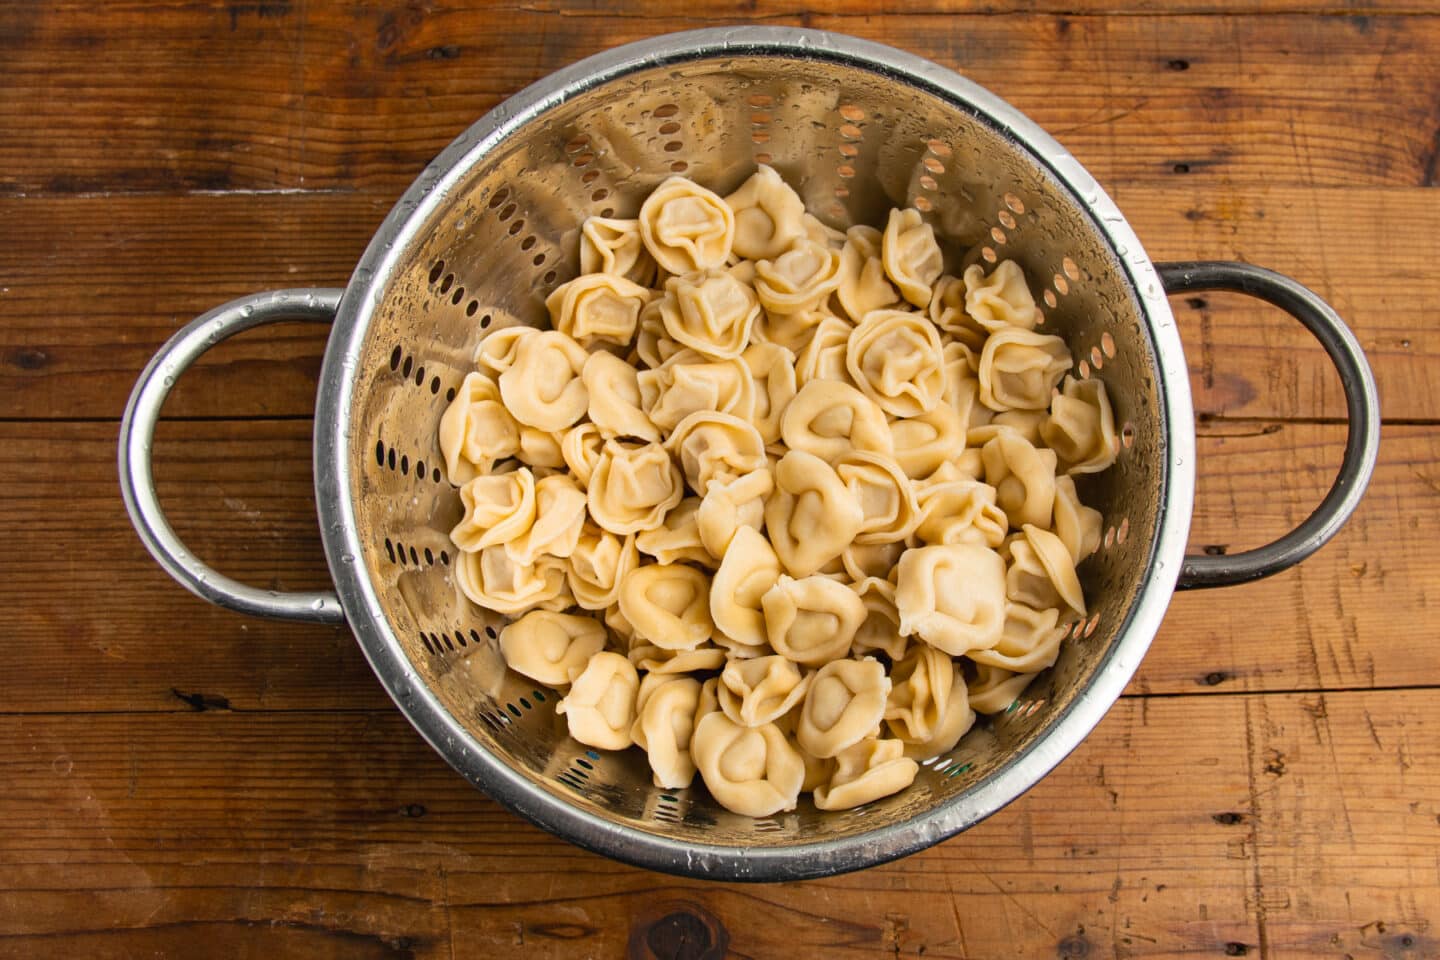 This is a picture of the cooked tortellini in a colander.